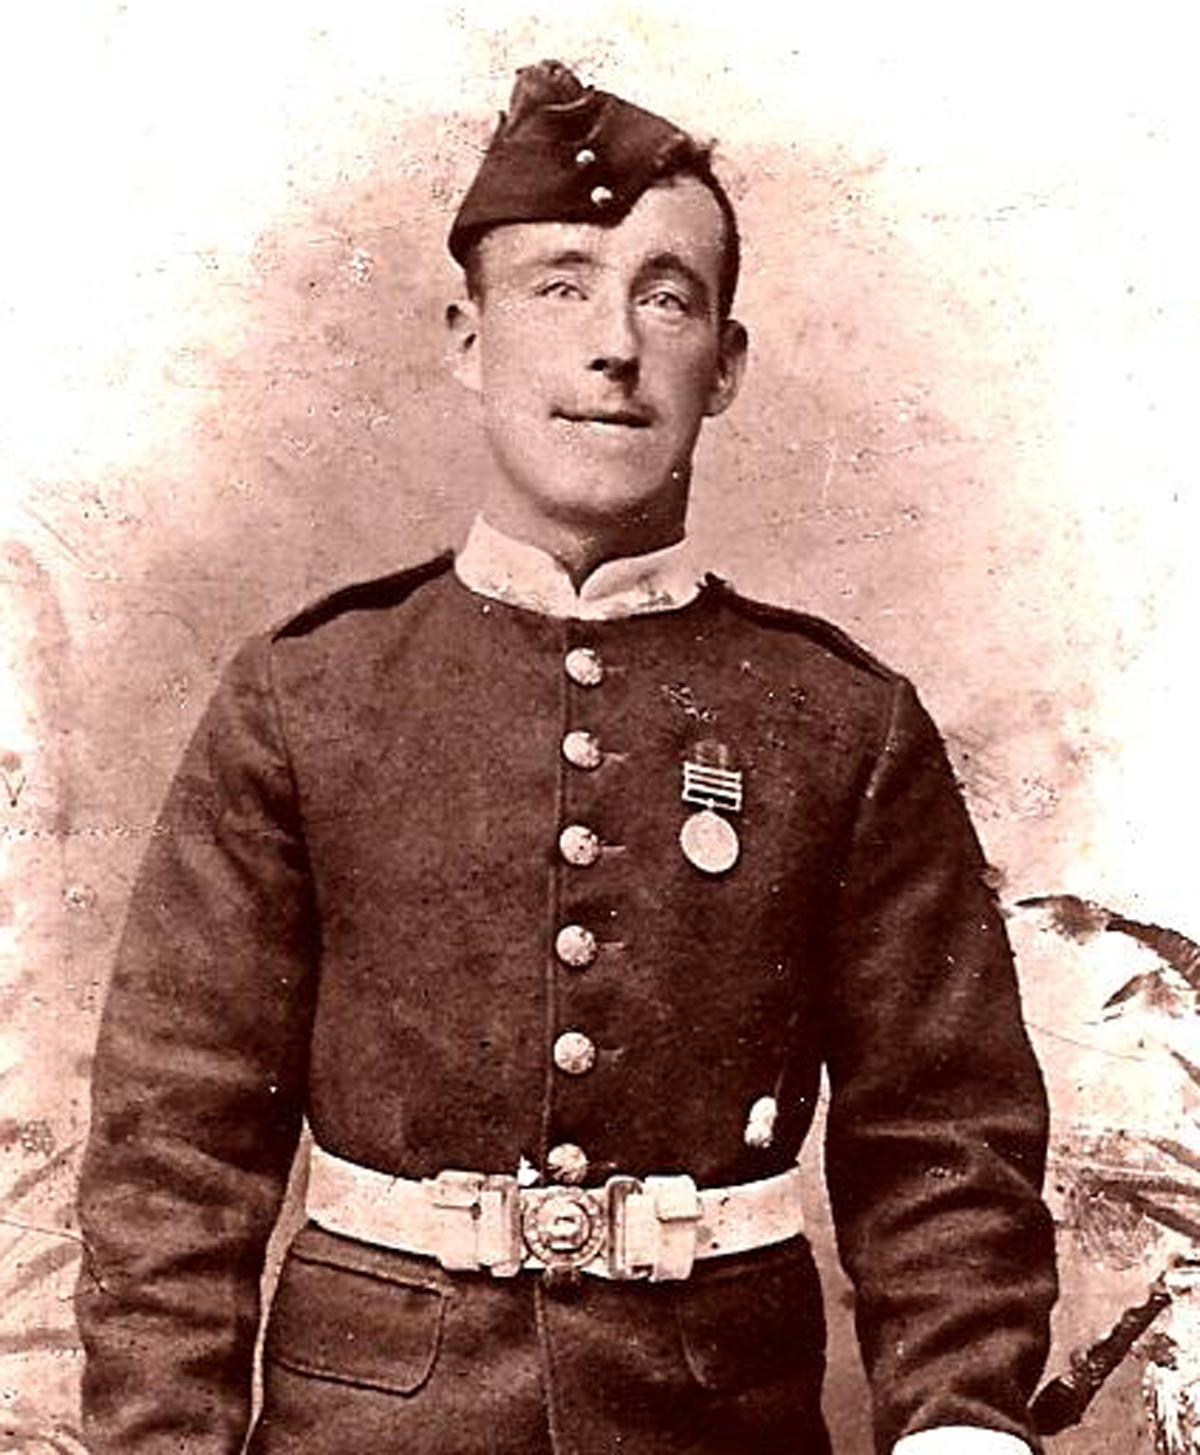 Charles Adams, the grandfather of Arnside Coastguard station officer Nigel Capstick, was killed at the Battle of the Aisne in 1914